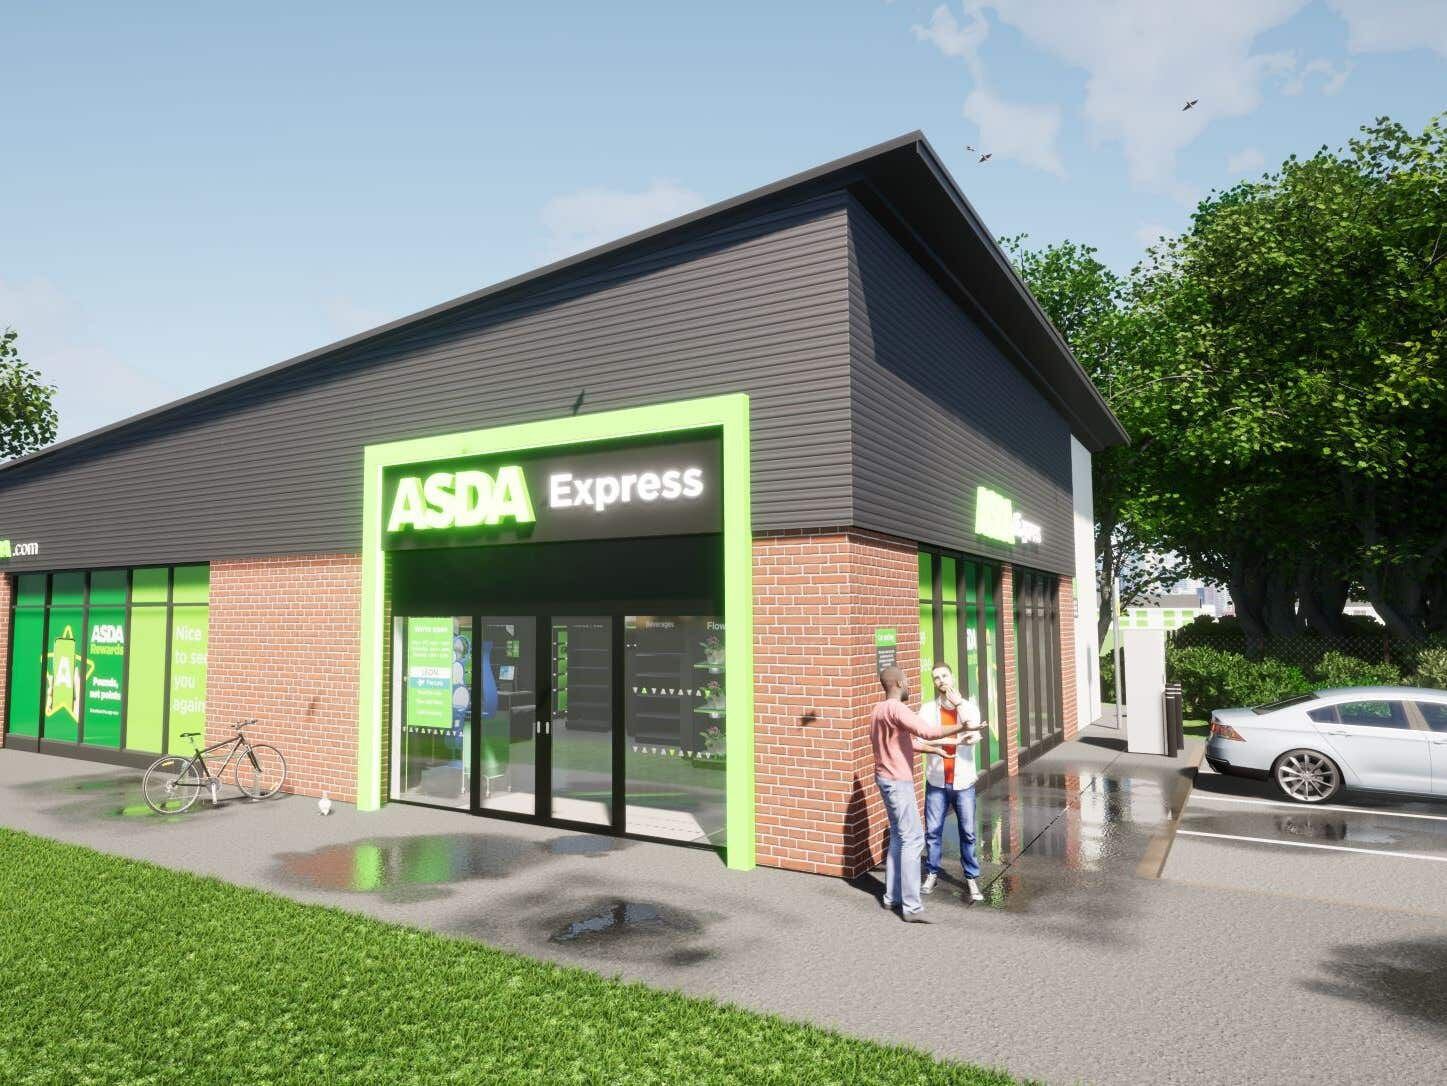 Supermarket giant to launch Asda Express convenience shops